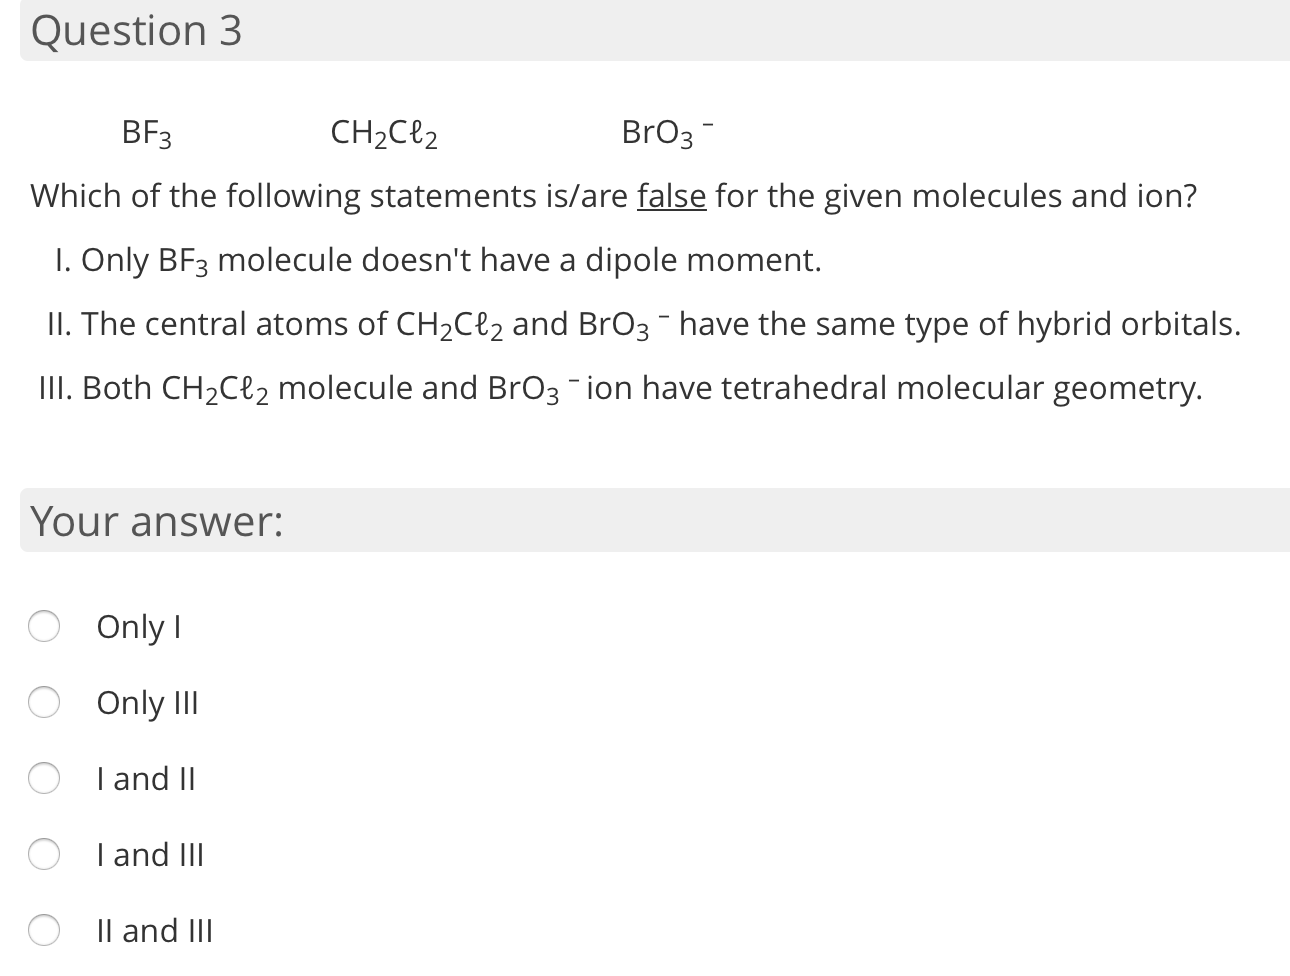 BF3
CH2Cl2
BrO3-
Which of the following statements is/are false for the given molecules and ion?
I. Only BF3 molecule doesn't have a dipole moment.
II. The central atoms of CH2C{2 and BrO3 - have the same type of hybrid orbitals.
II. Both CH2Cl2 molecule and BrO3-ion have tetrahedral molecular geometry.
